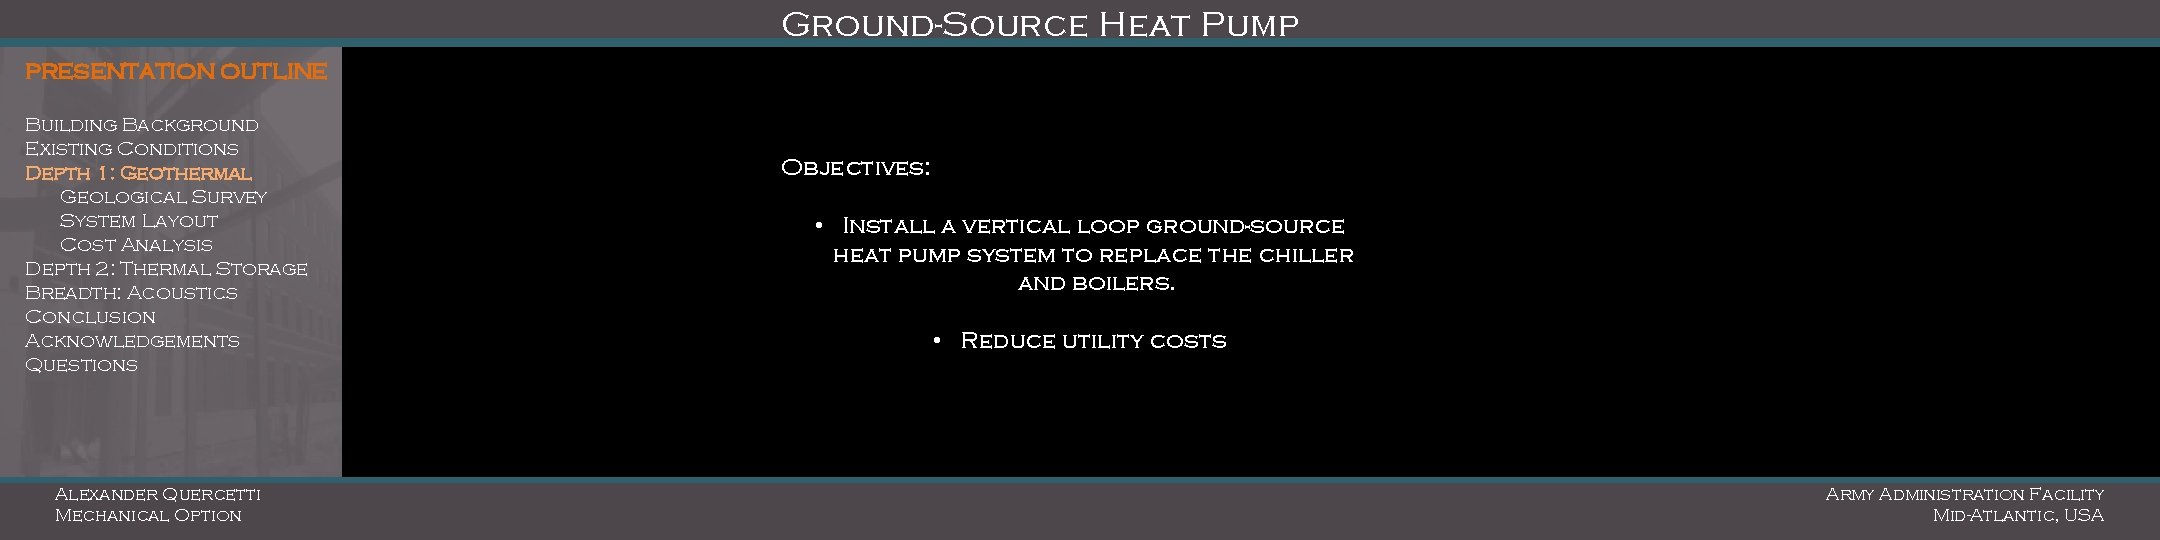 Ground-Source Heat Pump PRESENTATION OUTLINE Building Background Existing Conditions Depth 1: Geothermal Geological Survey